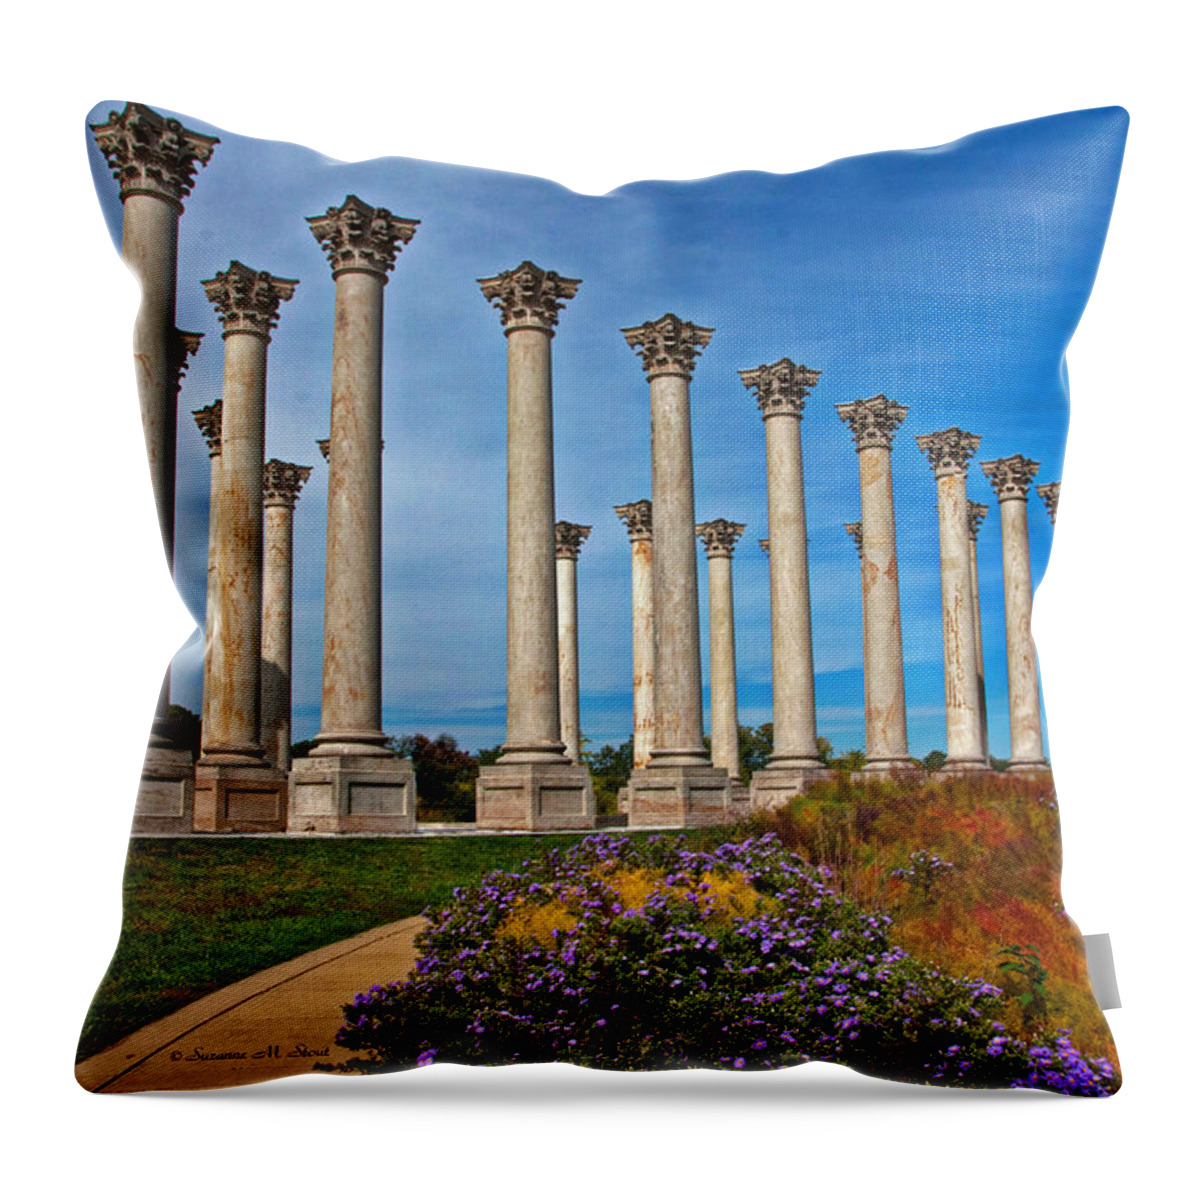 Autumn Throw Pillow featuring the photograph National Capitol Columns by Suzanne Stout